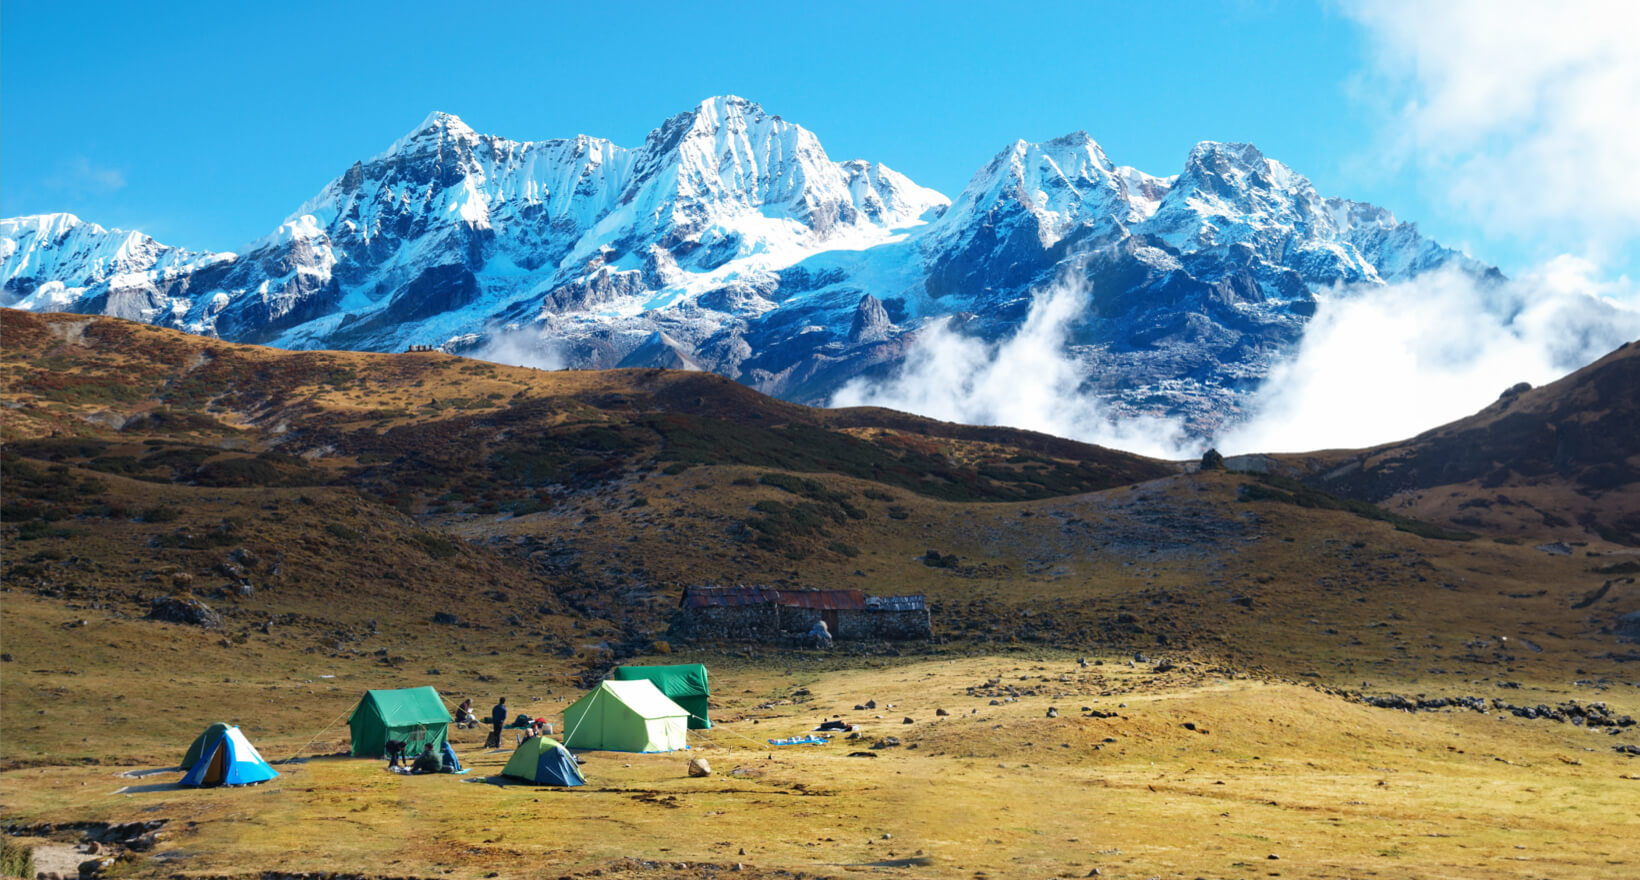 sikkim camping by the mountains - Himalayan Institute